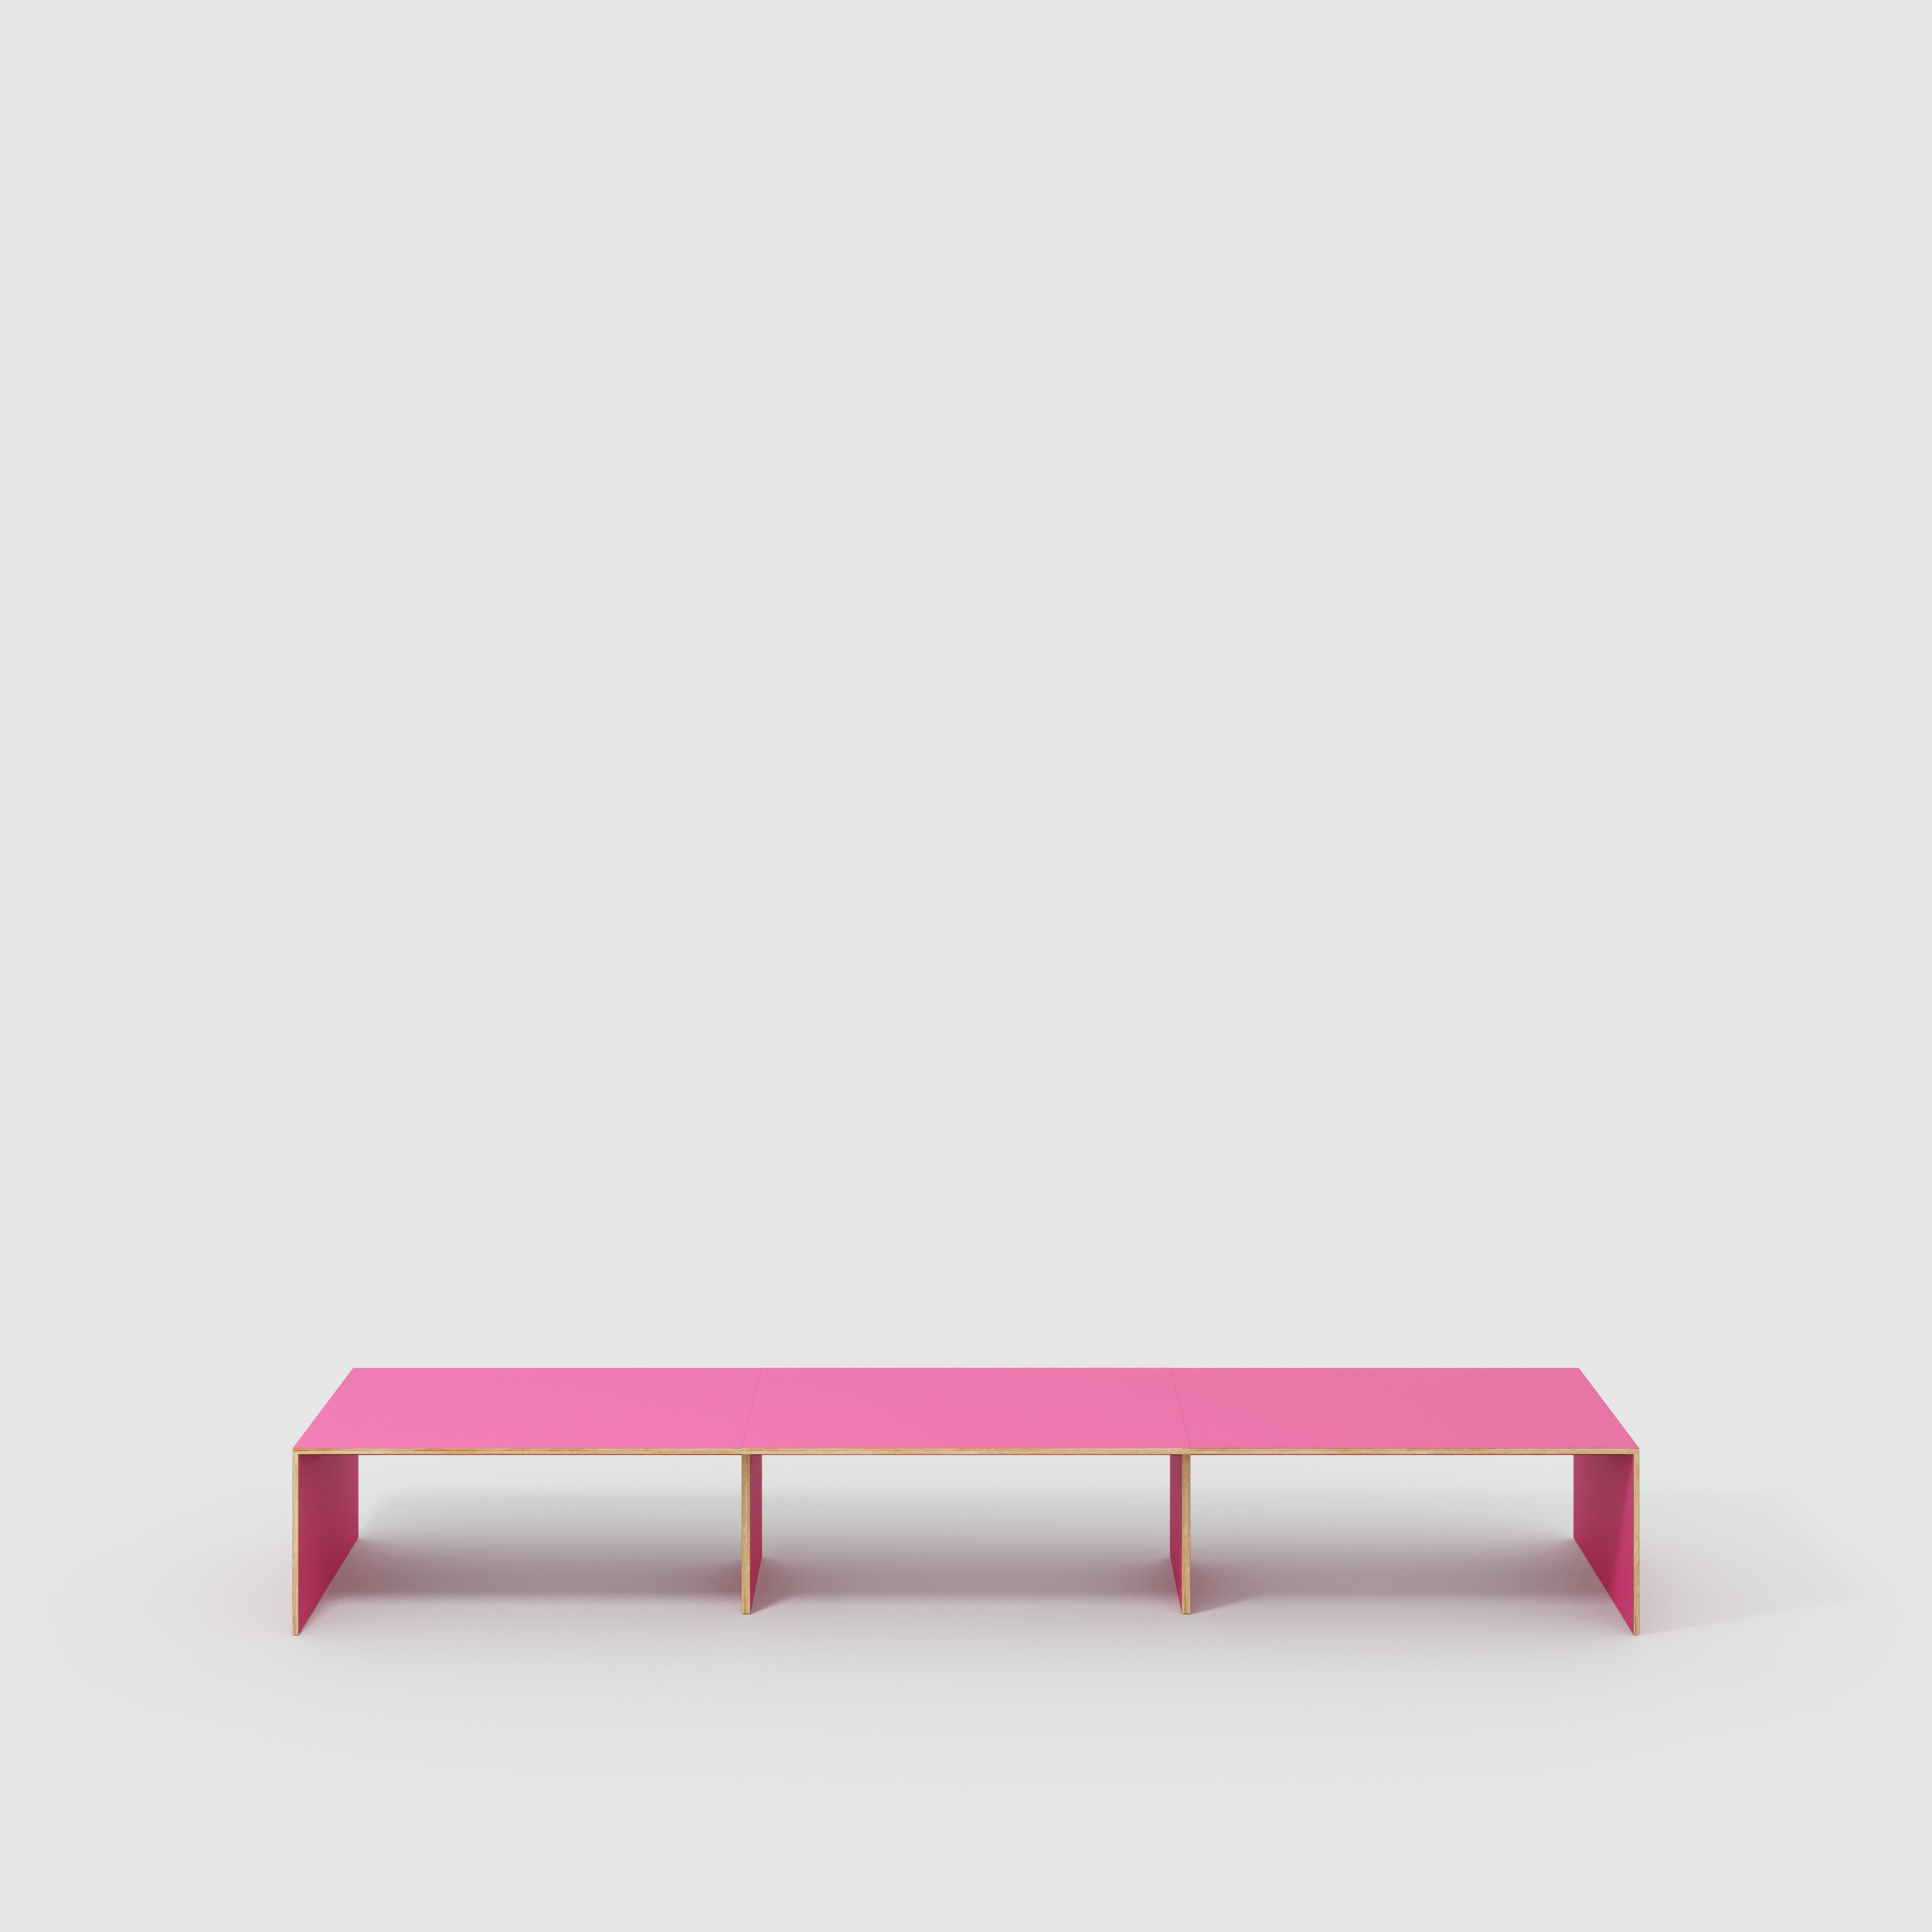 Table with Solid Sides - Formica Juicy Pink - 5600(w) x 1000(d) x 735(h)